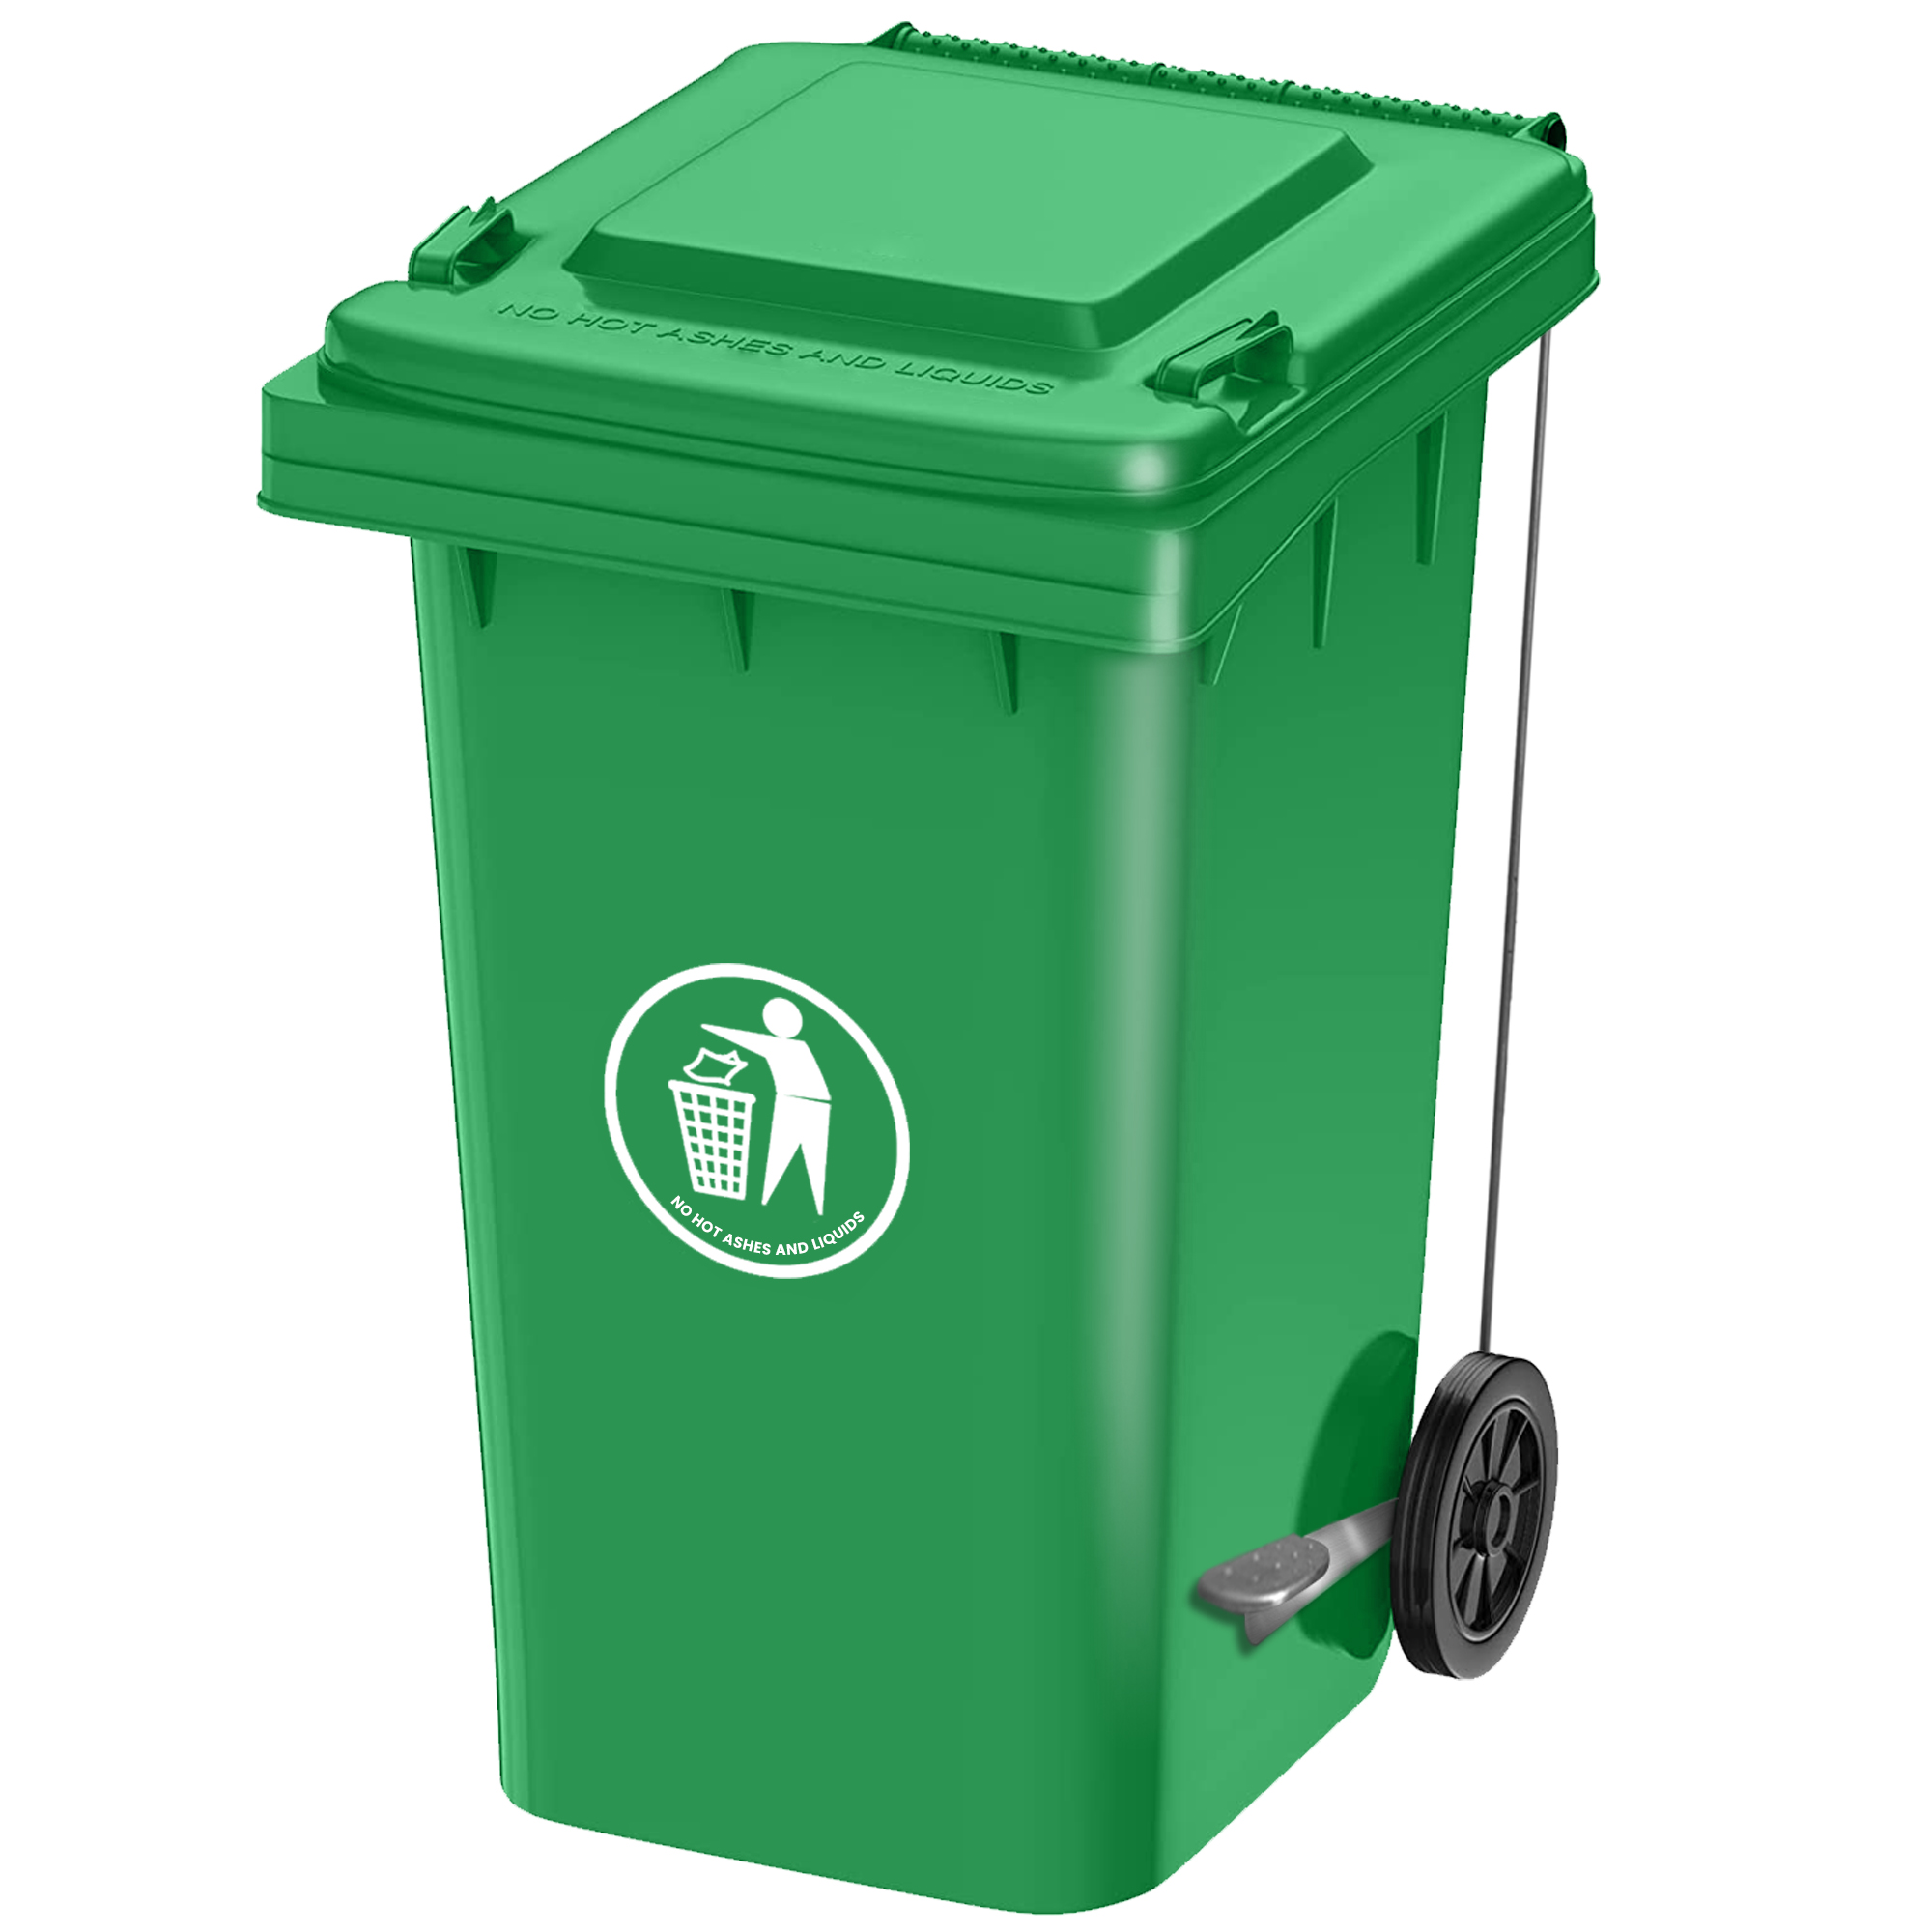 Garbage Bin Green 120ltr Round with Wheel (Height 93 cm, Width 46 cm,  Length 49cm) - HygieneForAll